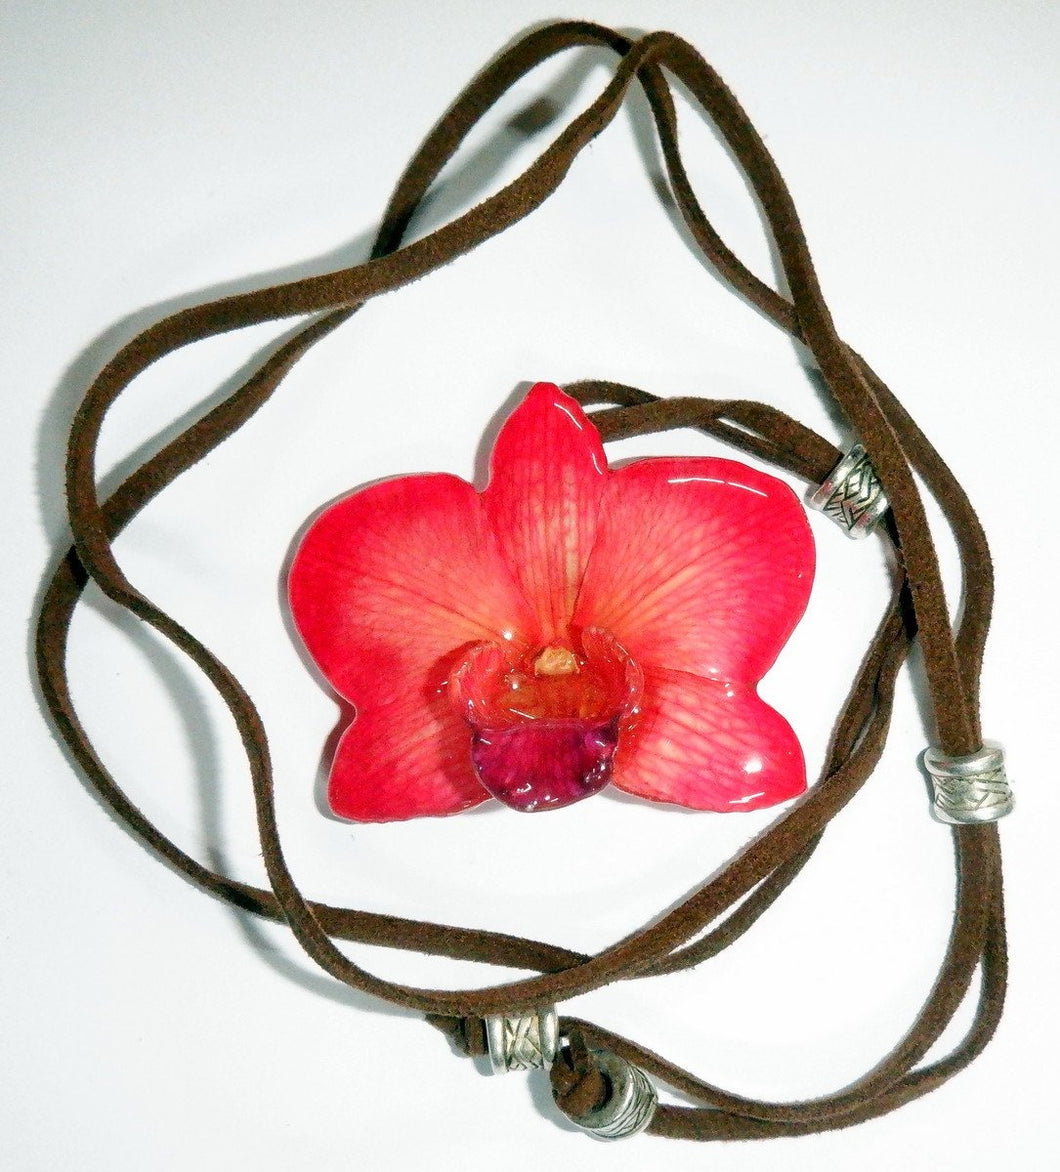 Real Orchid Flower Jewellery - One Of A Kind (51)